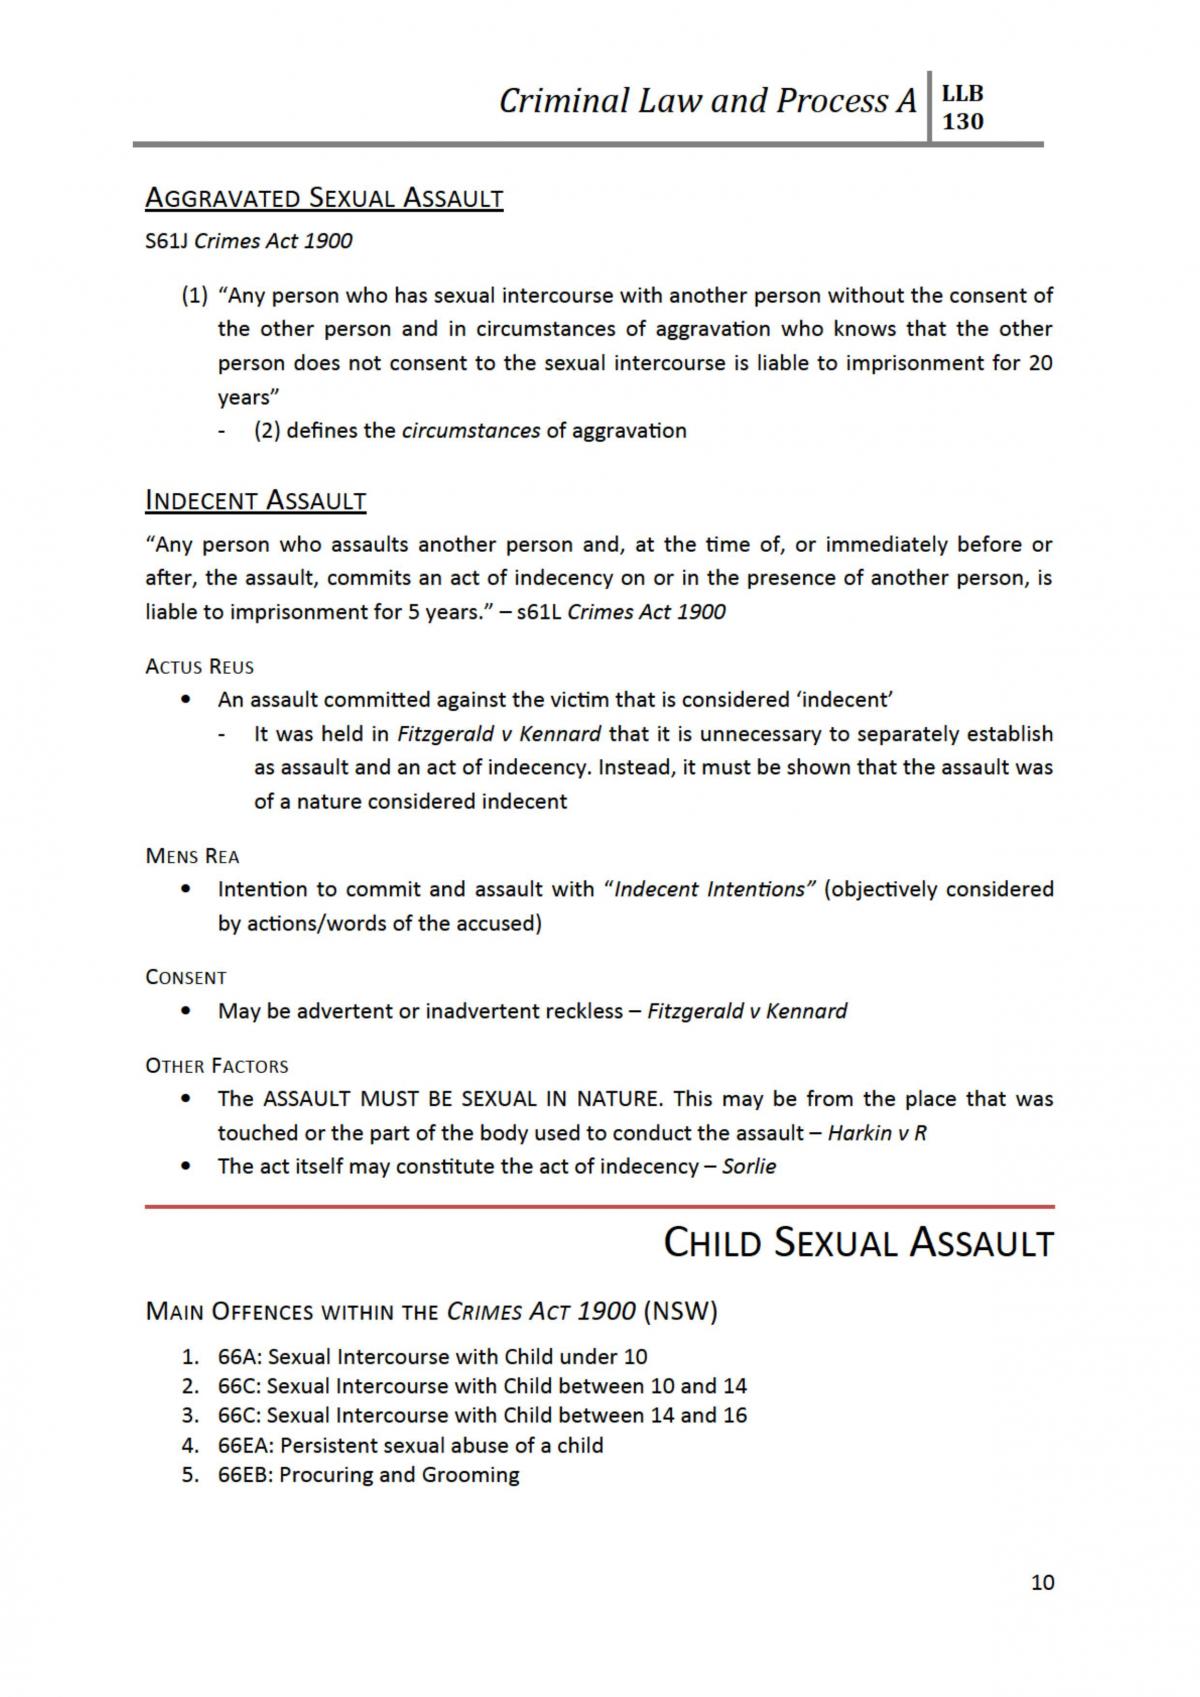 Full exam notes for criminal law and process a - Page 10